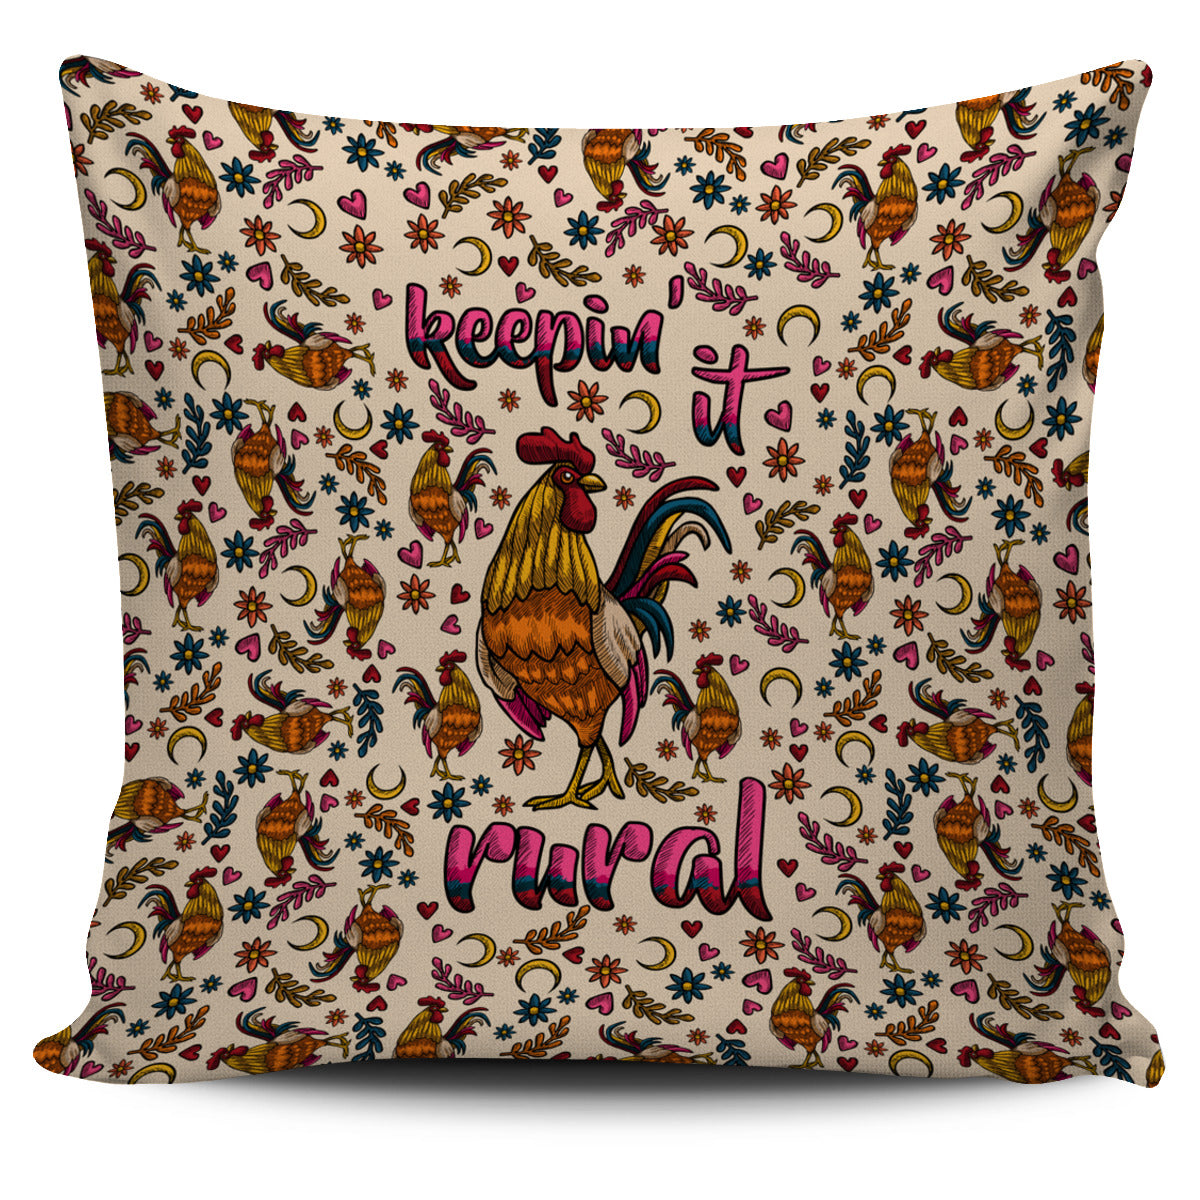 Keepin' It Rural Pillow Cover